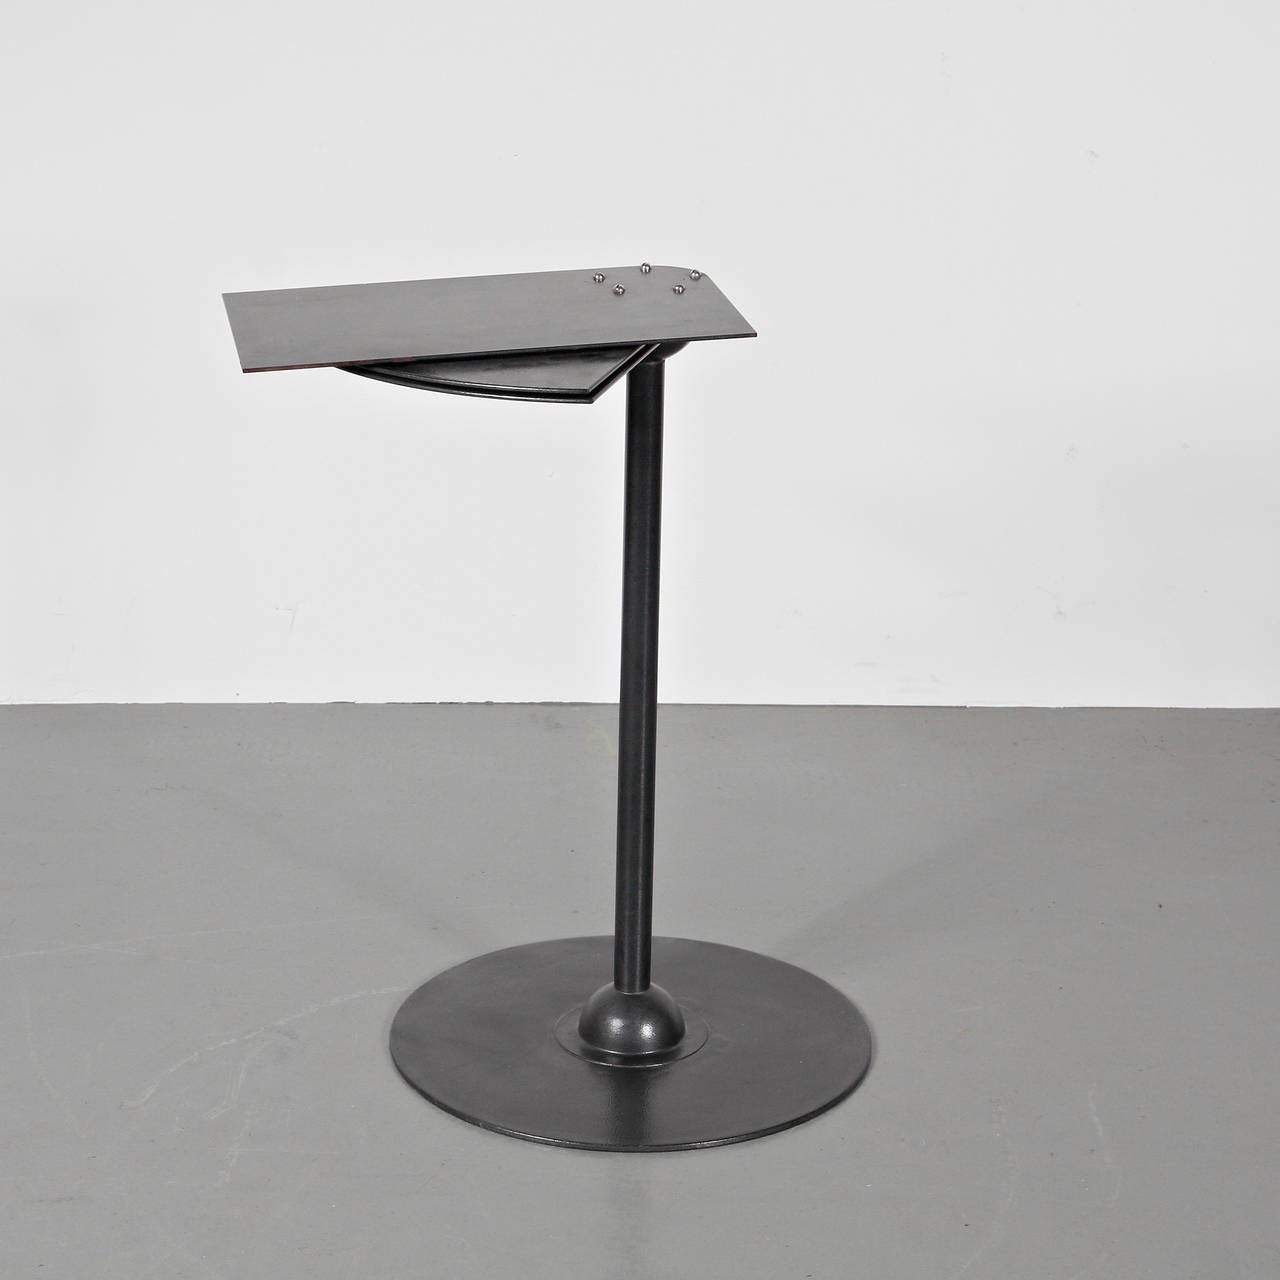 Rare side table after the design by Pierre Chareau, circa 1920, manufactured around 1970.

The table is completely made of high quality metal. It is a recent edition of Pierre Chareau's famous design.

In great original condition with minor wear